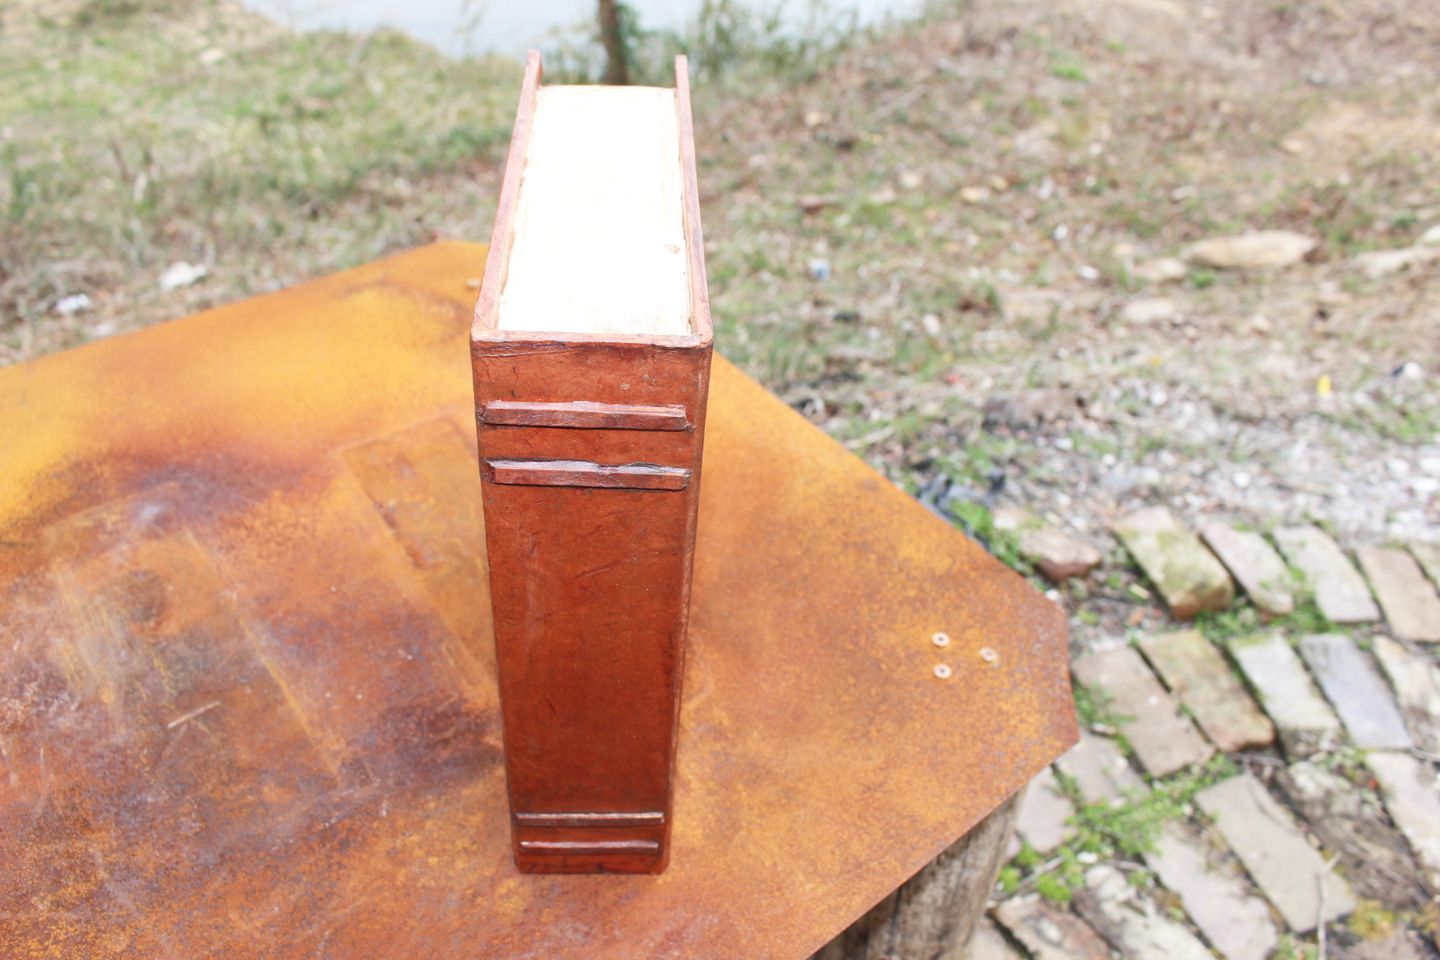 READER’S DELIGHT, a Full Size, Unique Cremation Urn for Human or Pet Ashes